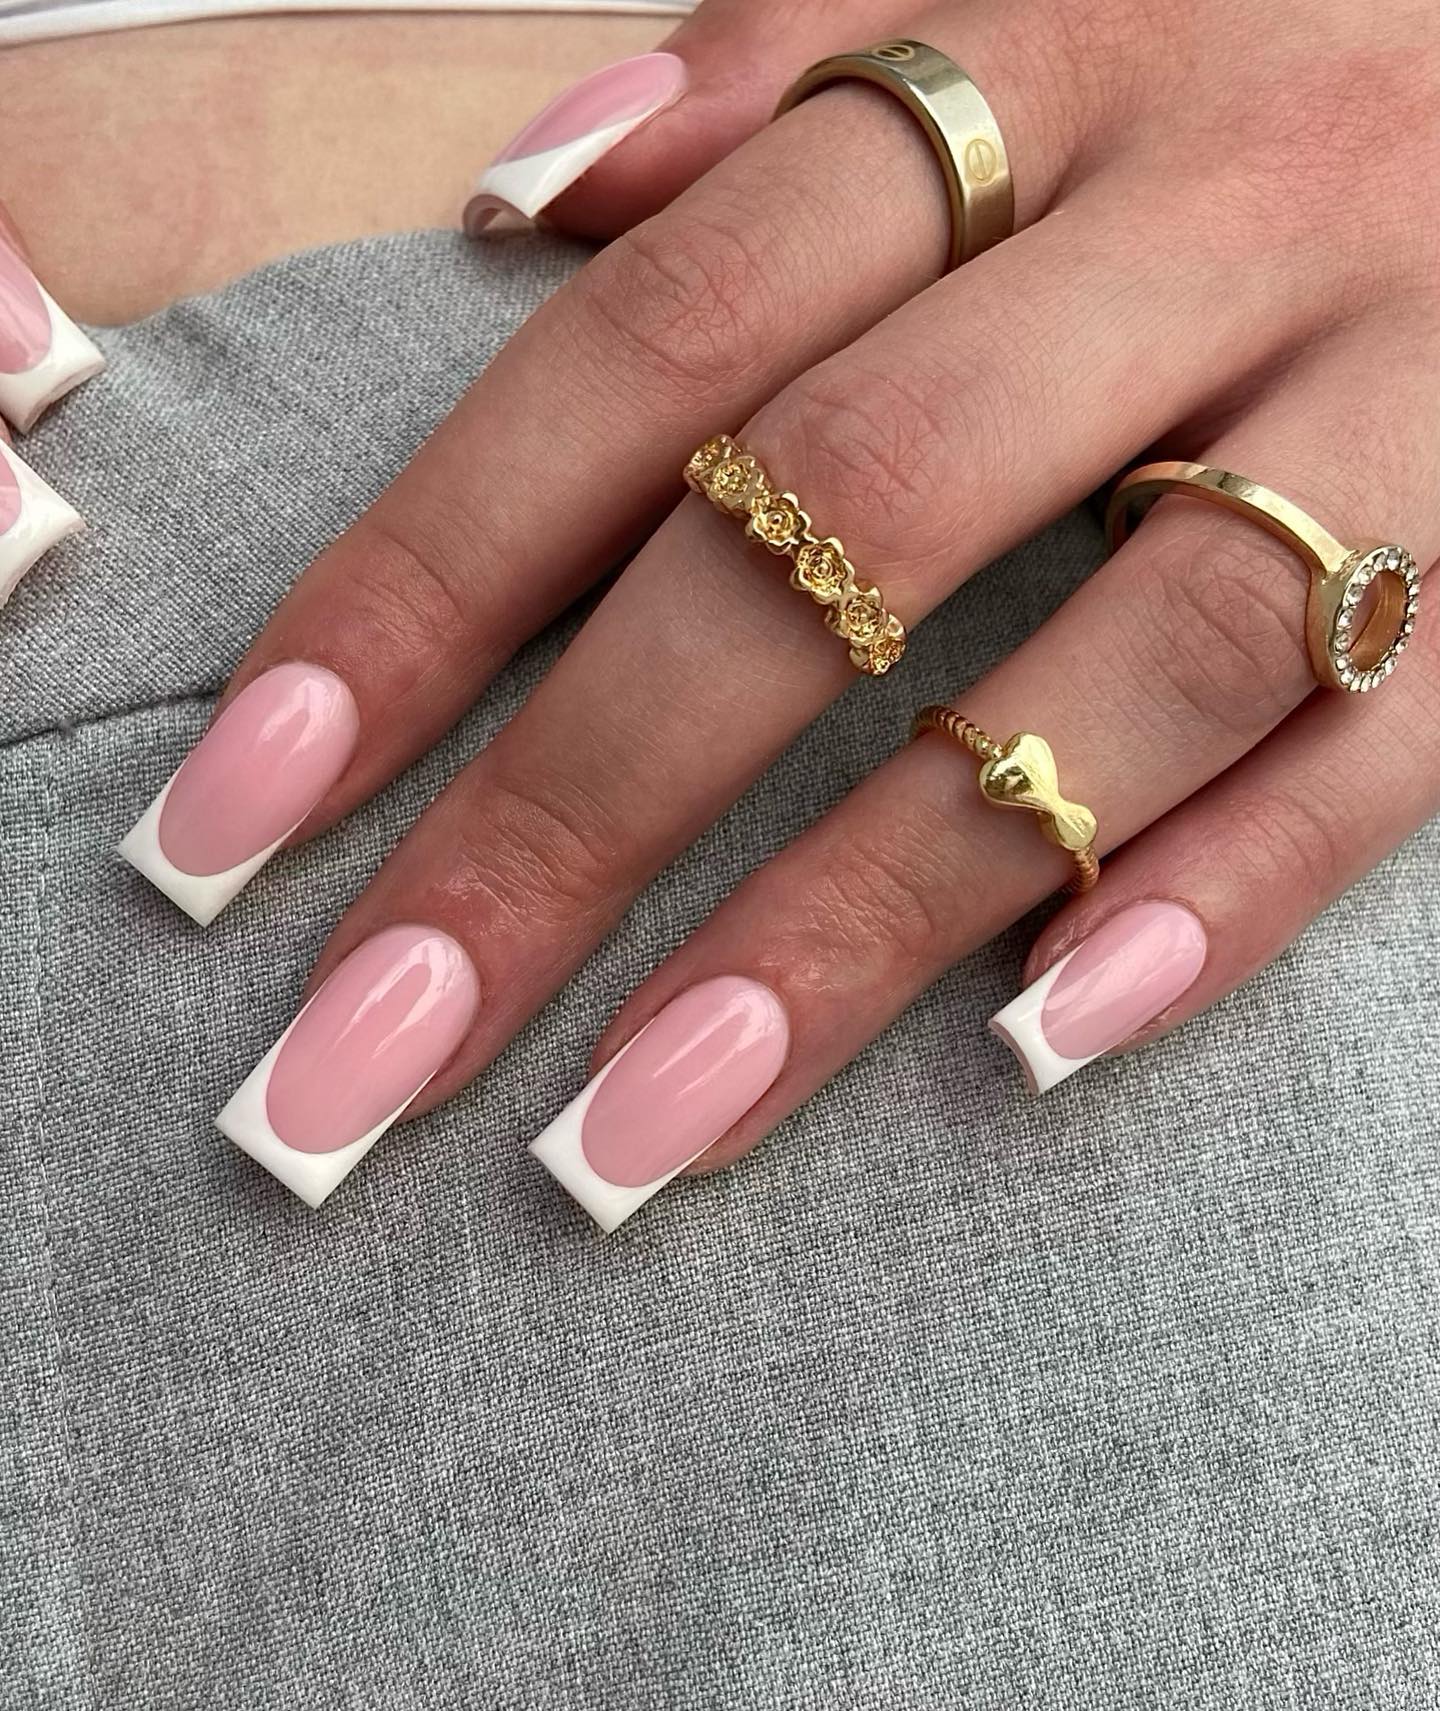 A pink base paired with your French nail tip will look classy and sophisticated.